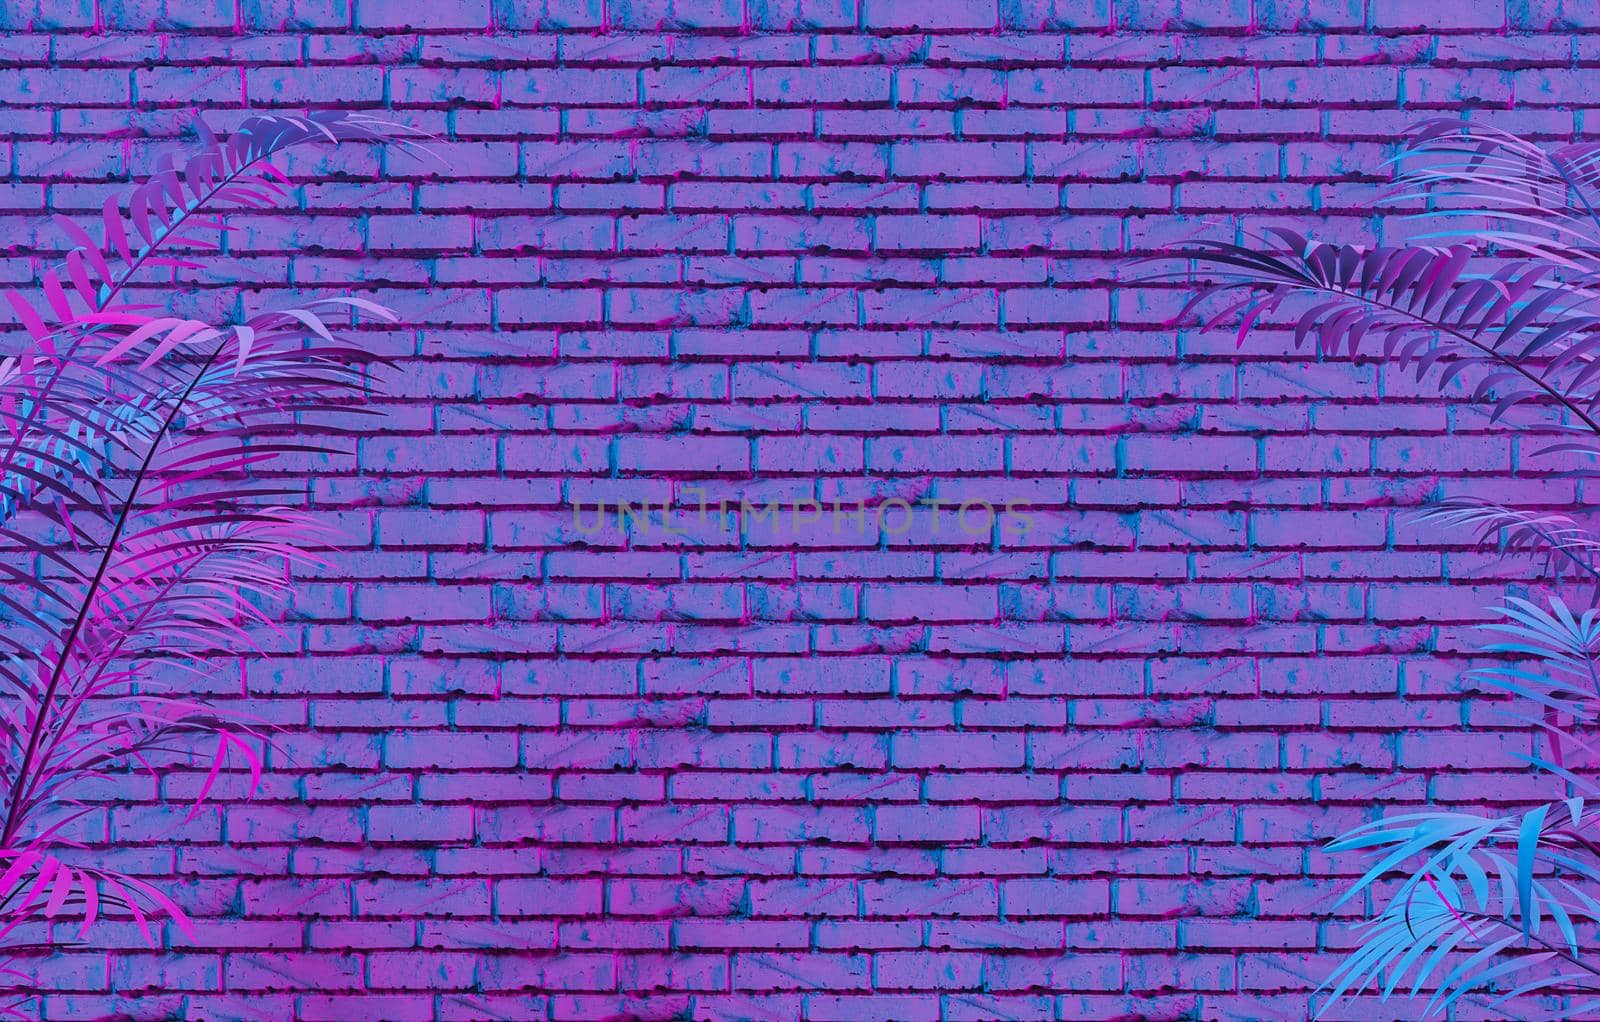 3D rendering of tropical plants growing near brick wall with bright purple neon illumination as abstract background